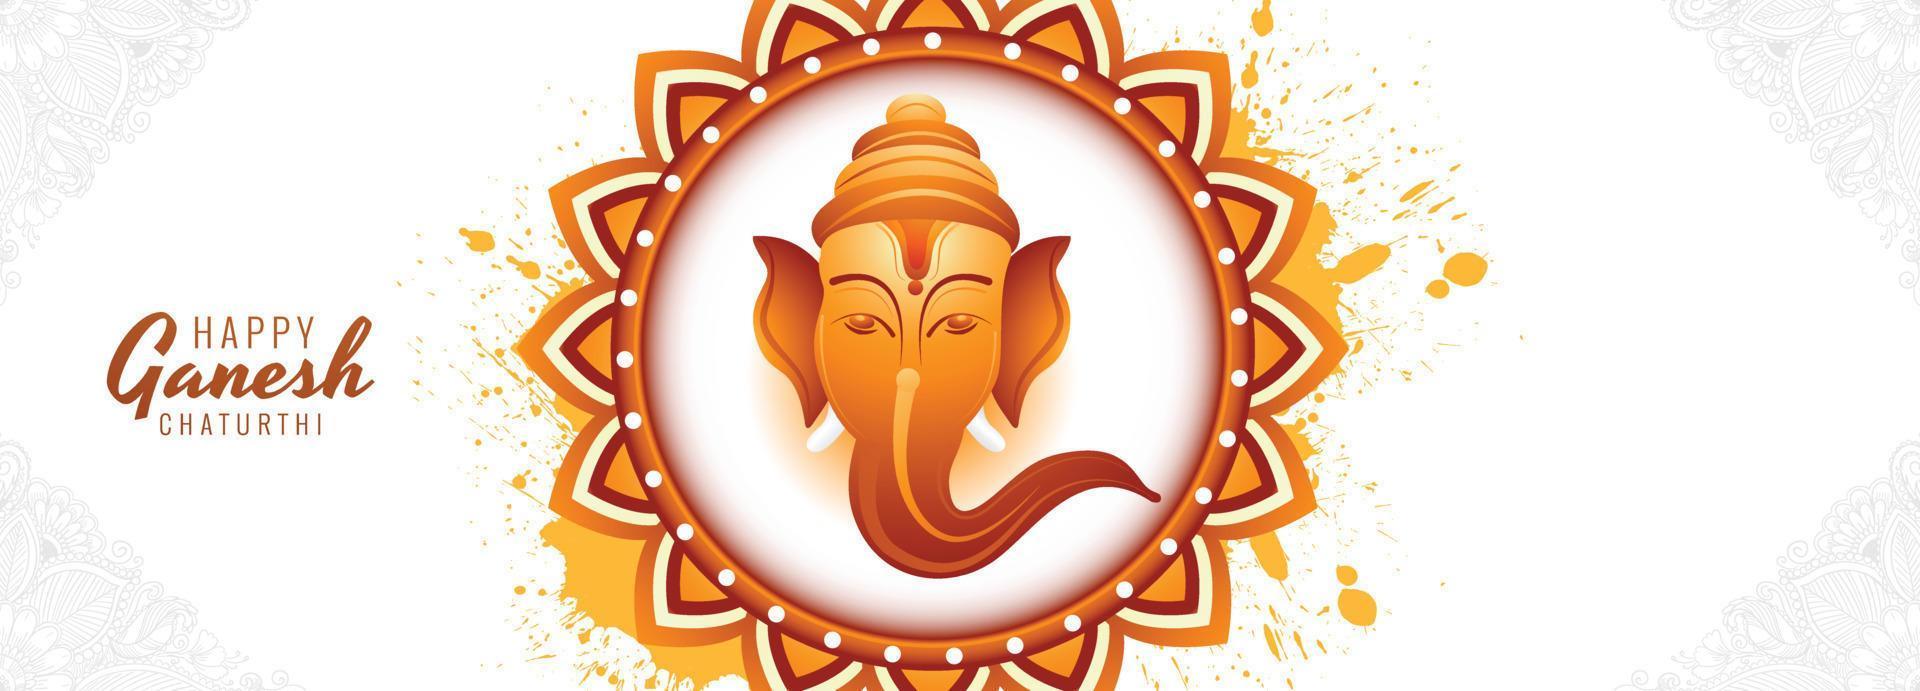 Happy ganesh chaturthi indian religious festival banner card design vector